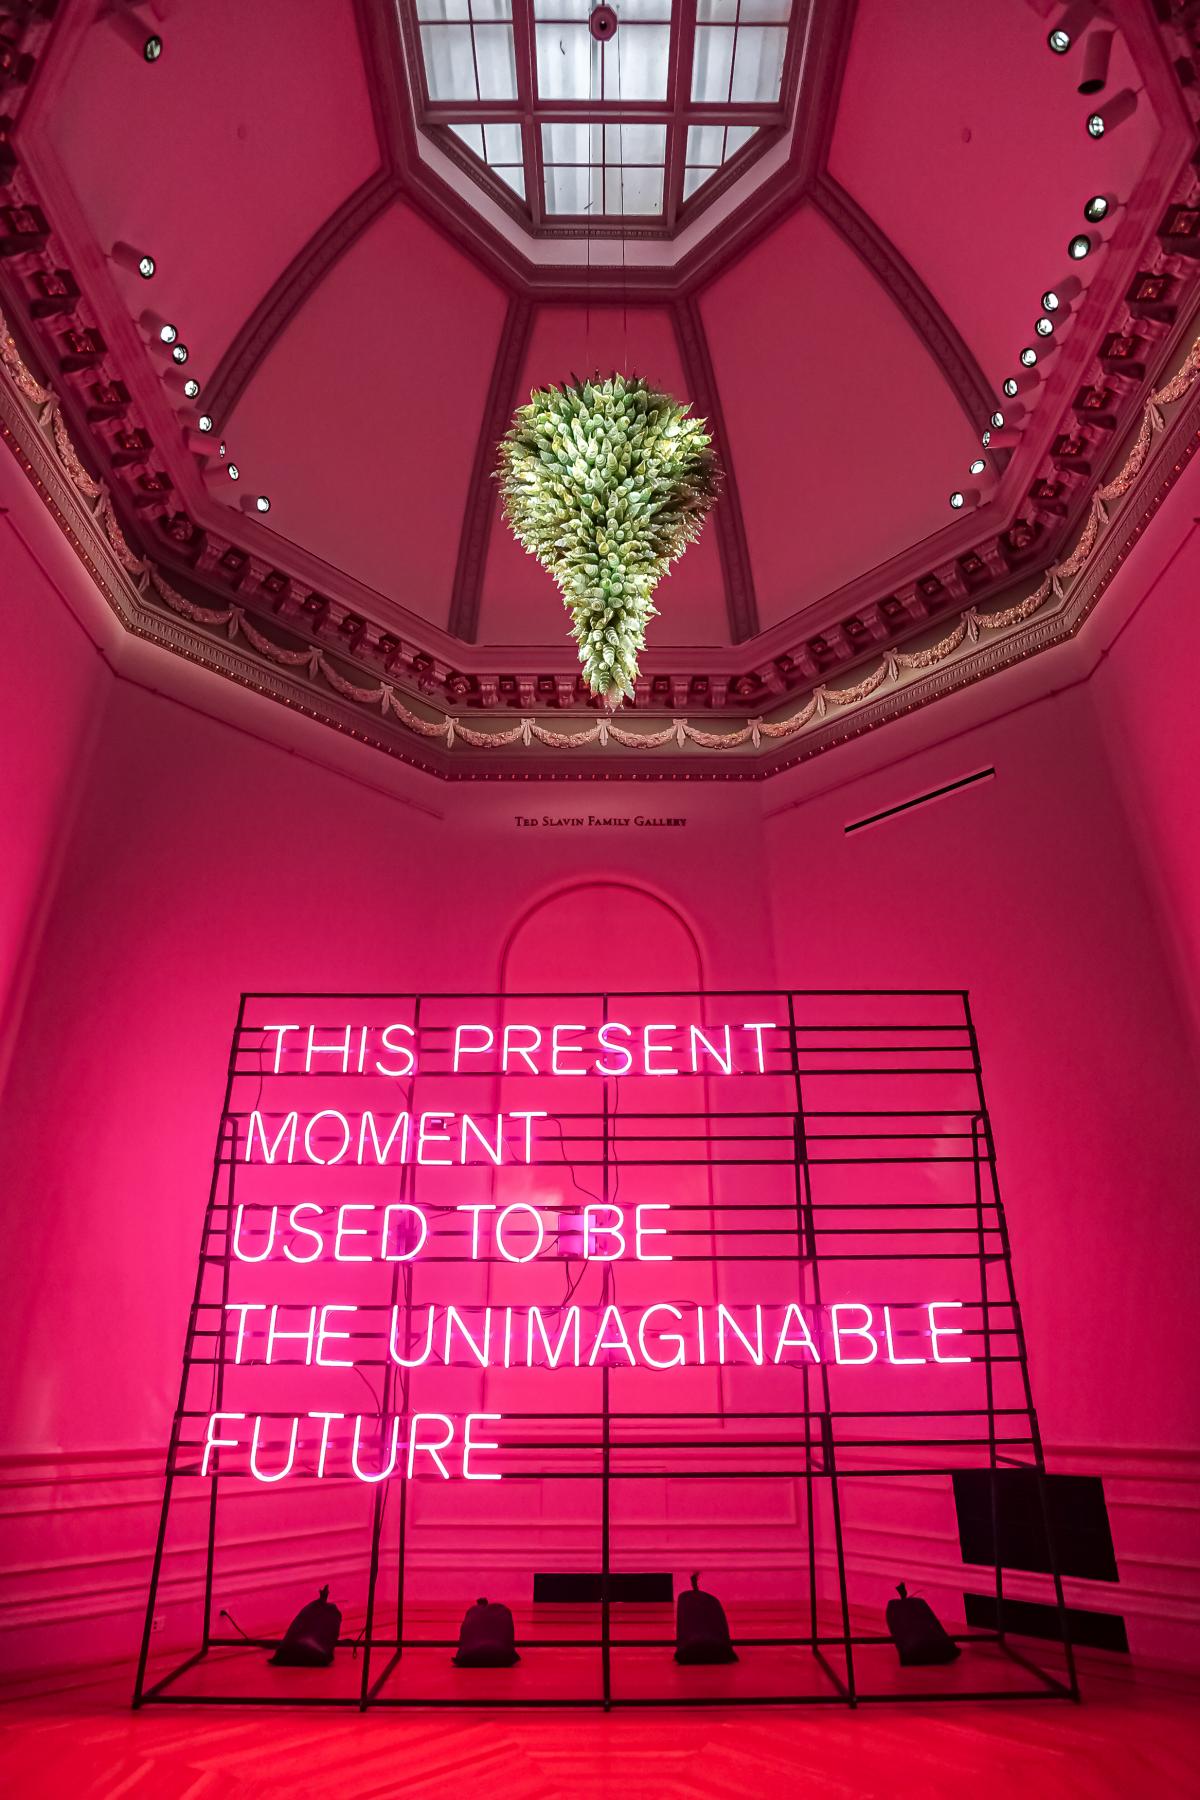 Neon that says "This Present Moment Used to Be the Unimaginable Future" under Chihuly chandelier